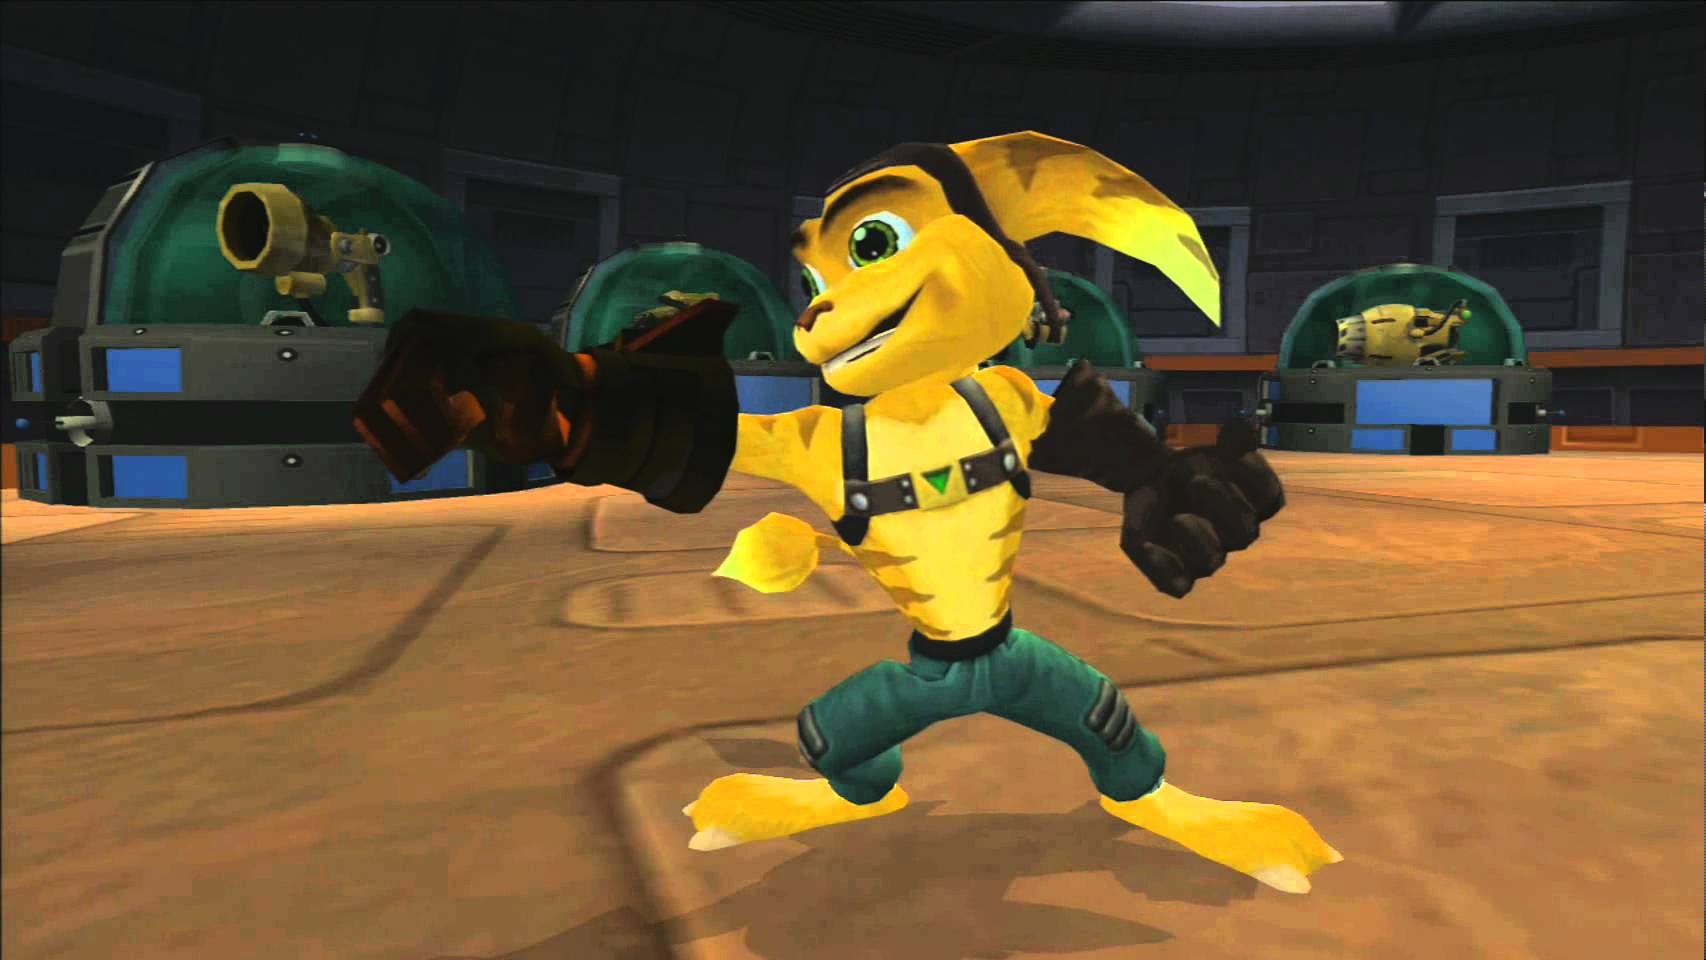 Ratchet & Clank Trilogy HD coming to PS Vita